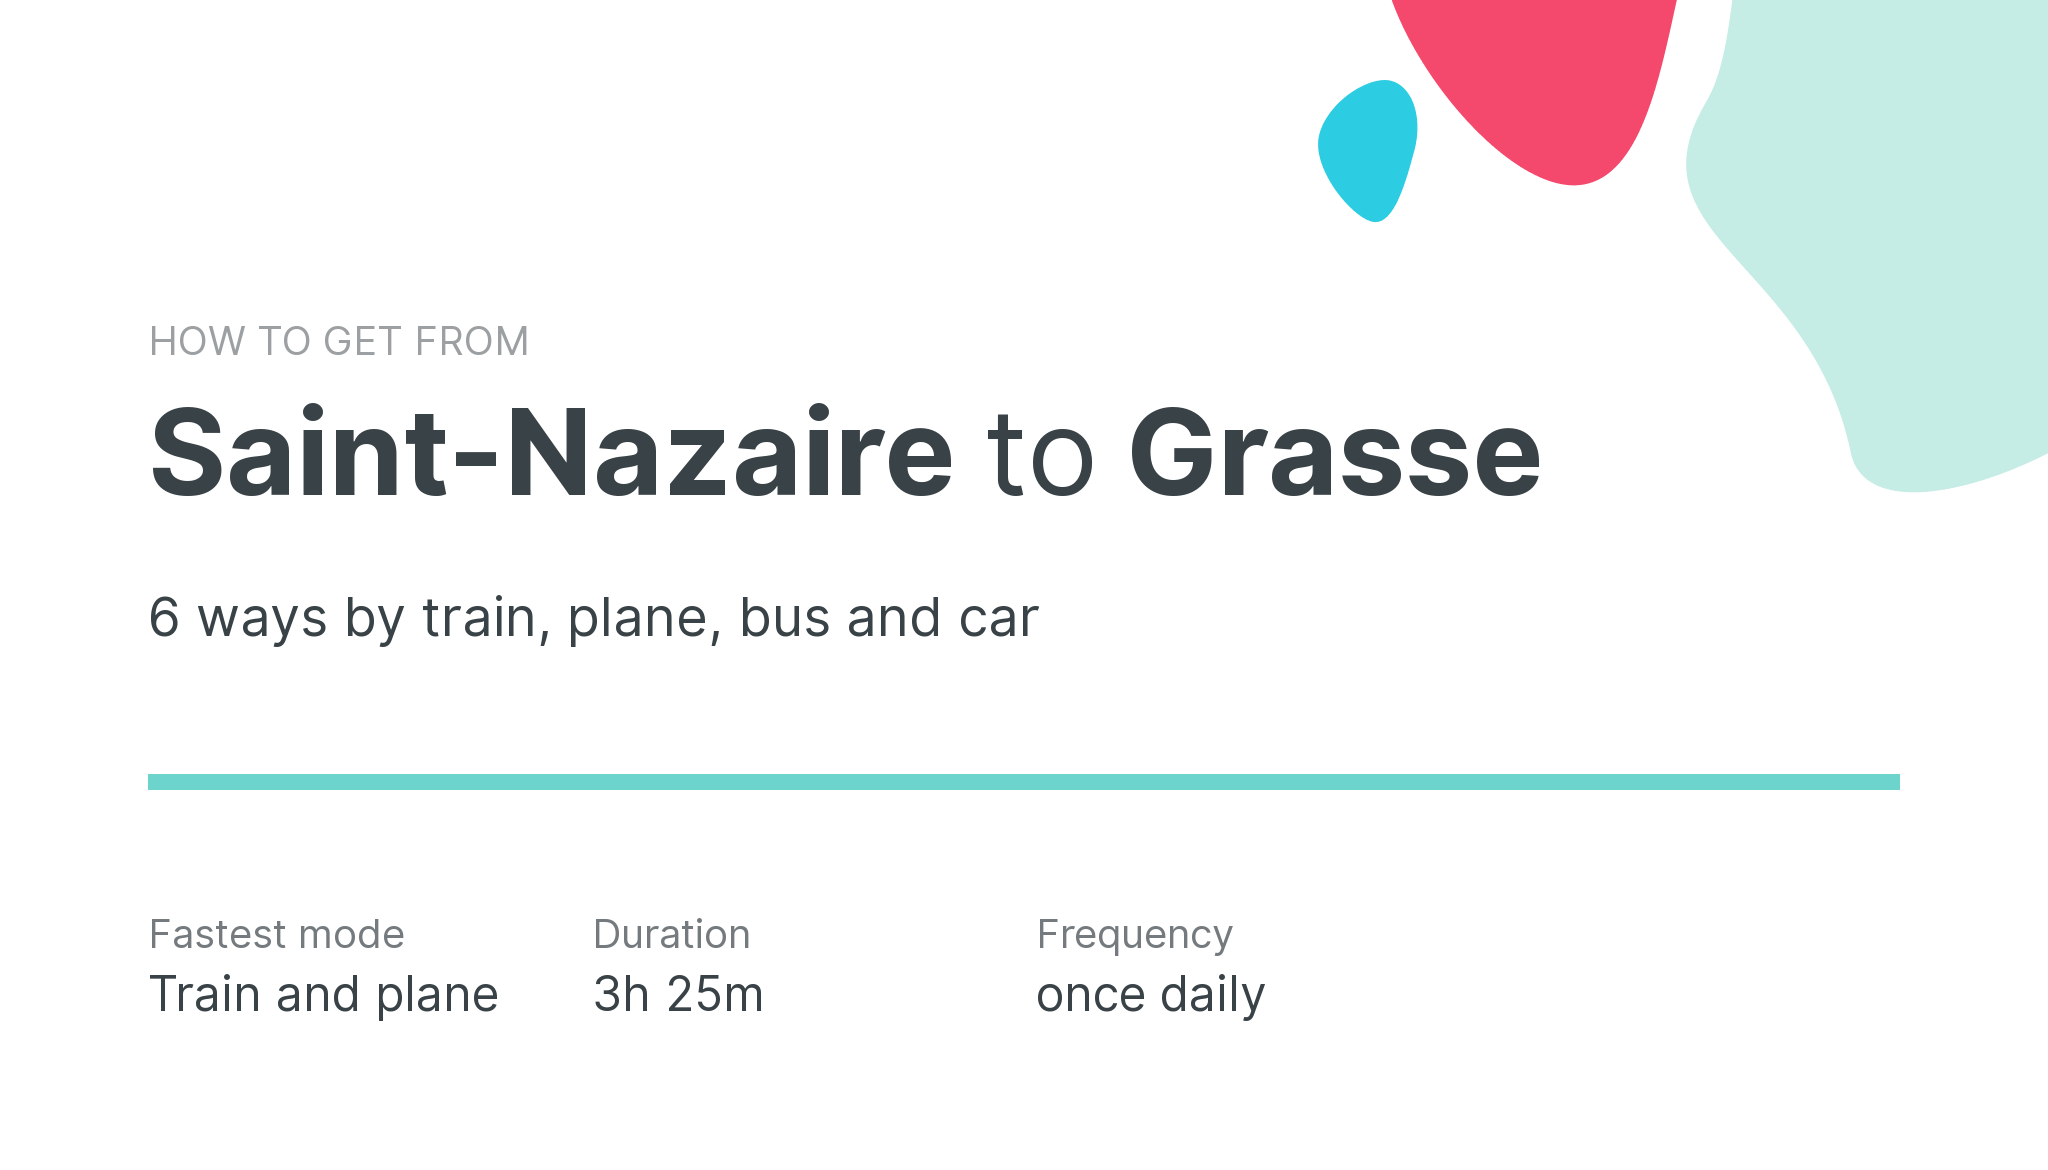 How do I get from Saint-Nazaire to Grasse